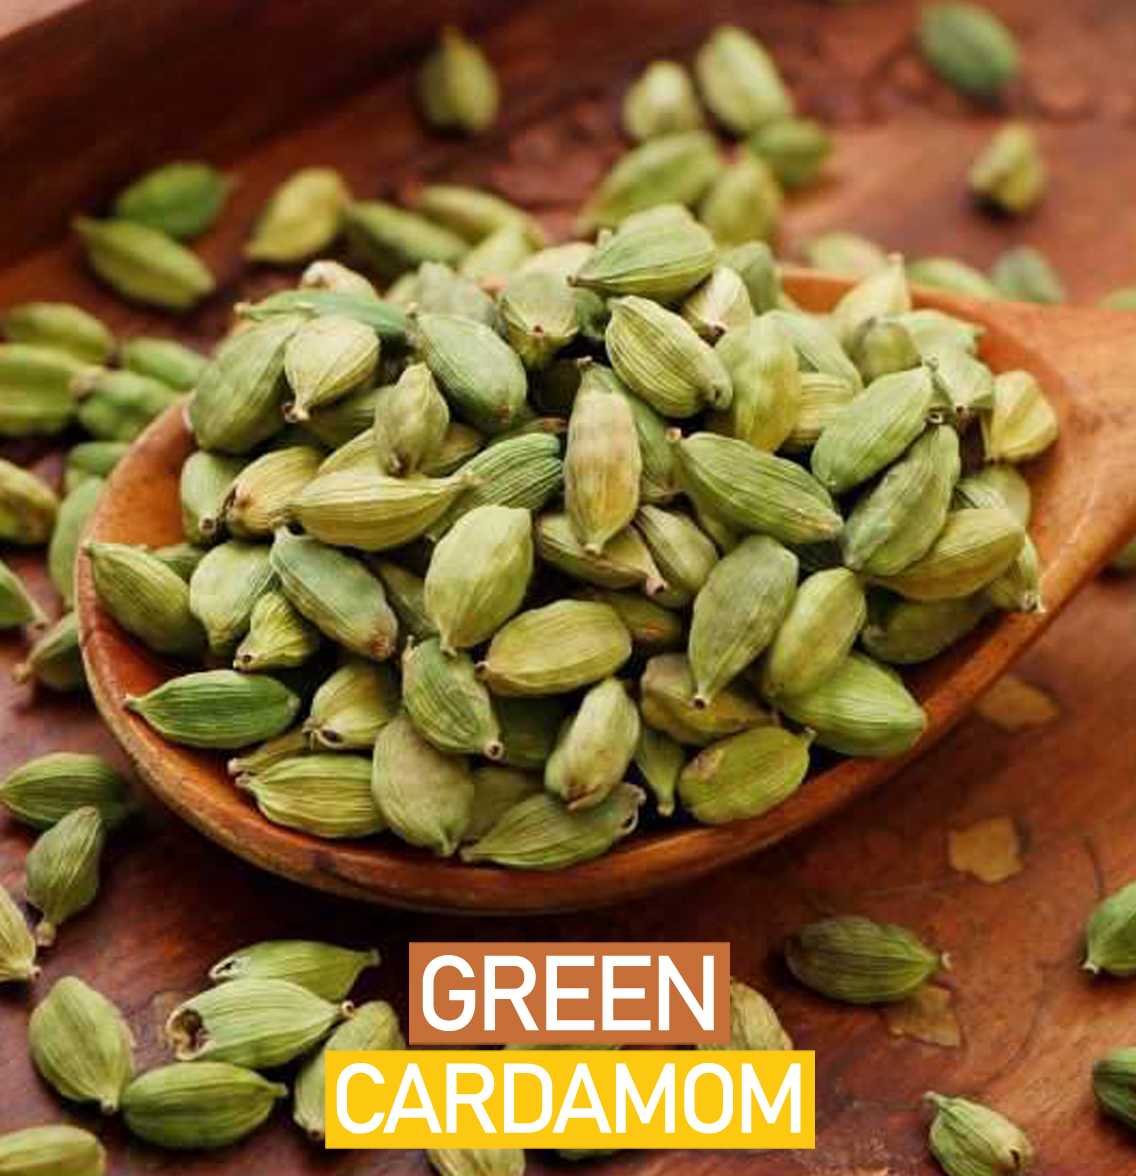 9 Benefits Of Green Cardamom That May Change Your Perspective.